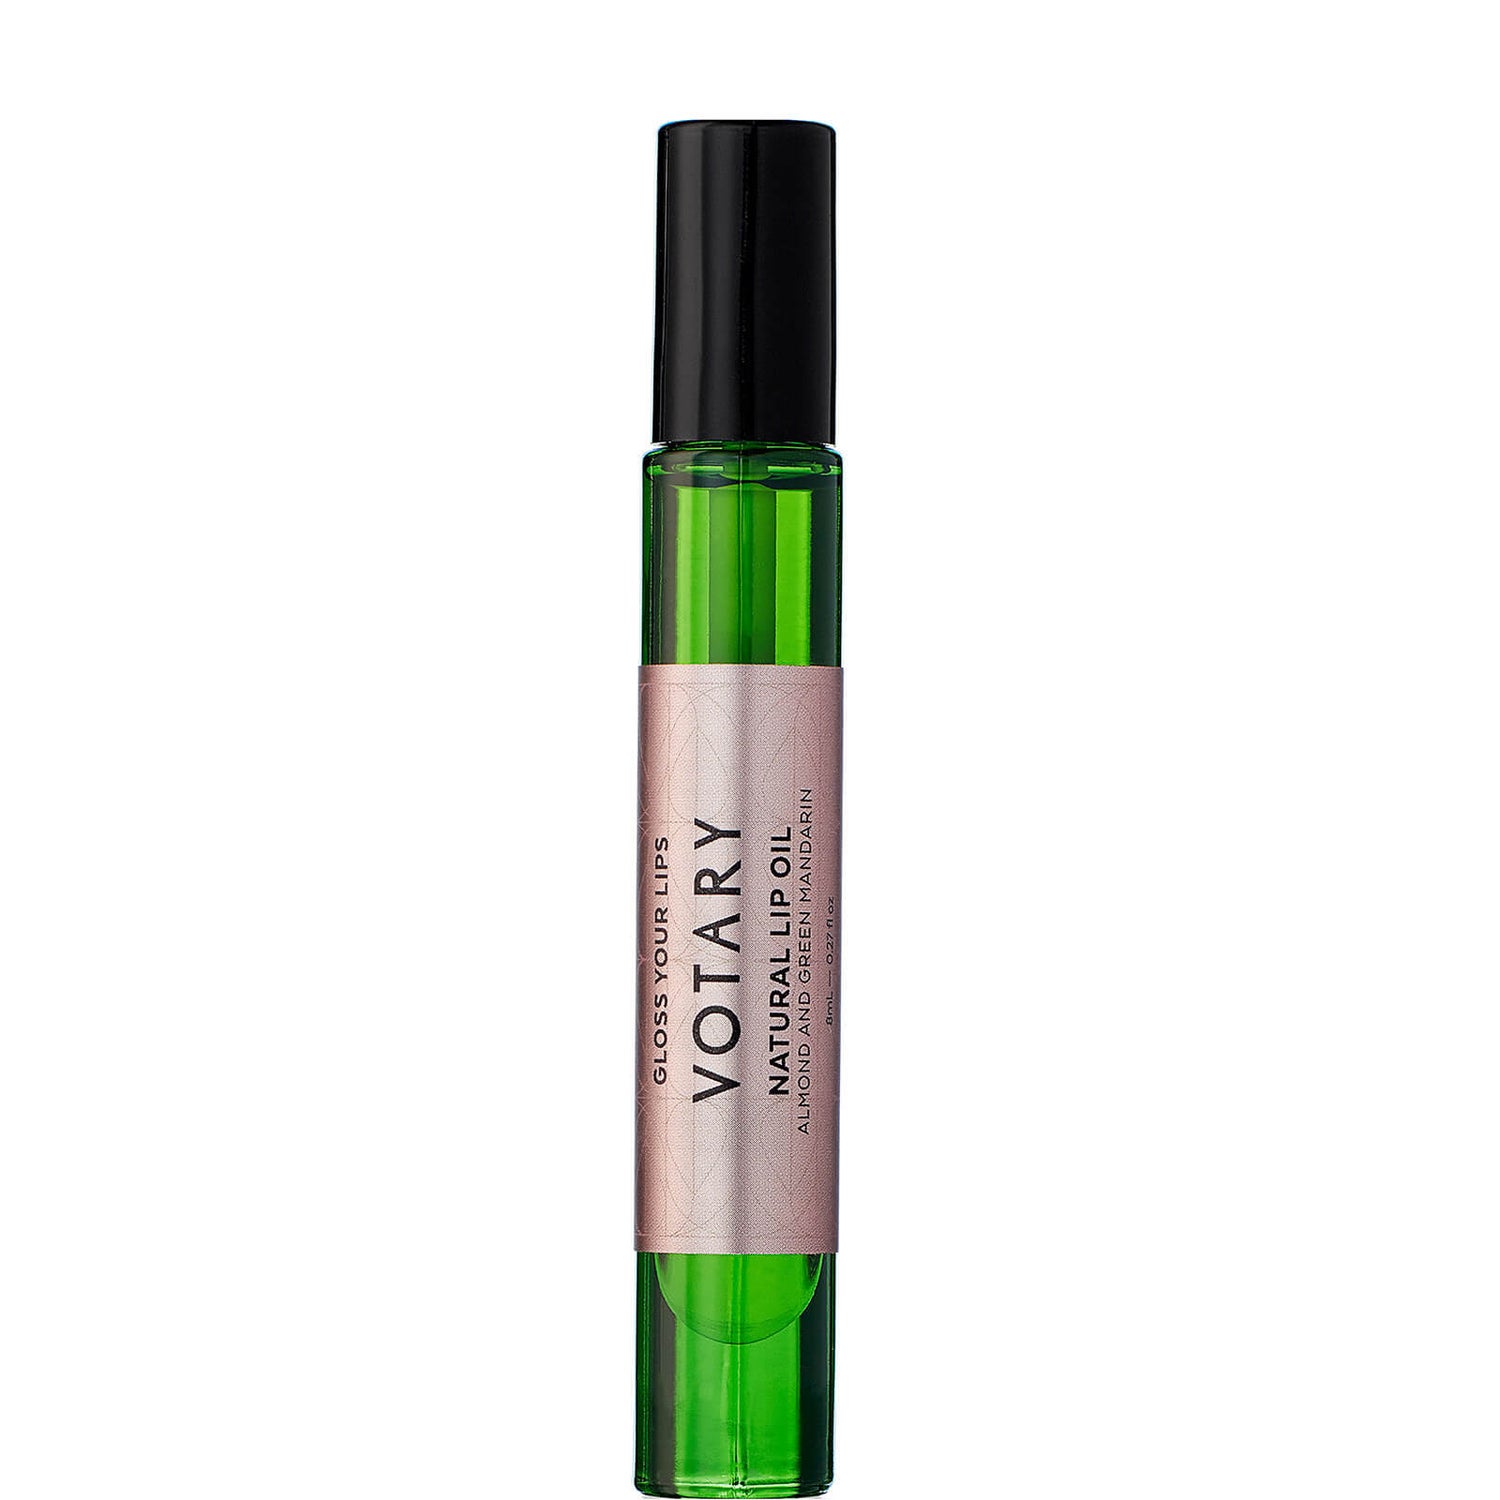 VOTARY Natural Lip Oil - Almond and Green Mandarin